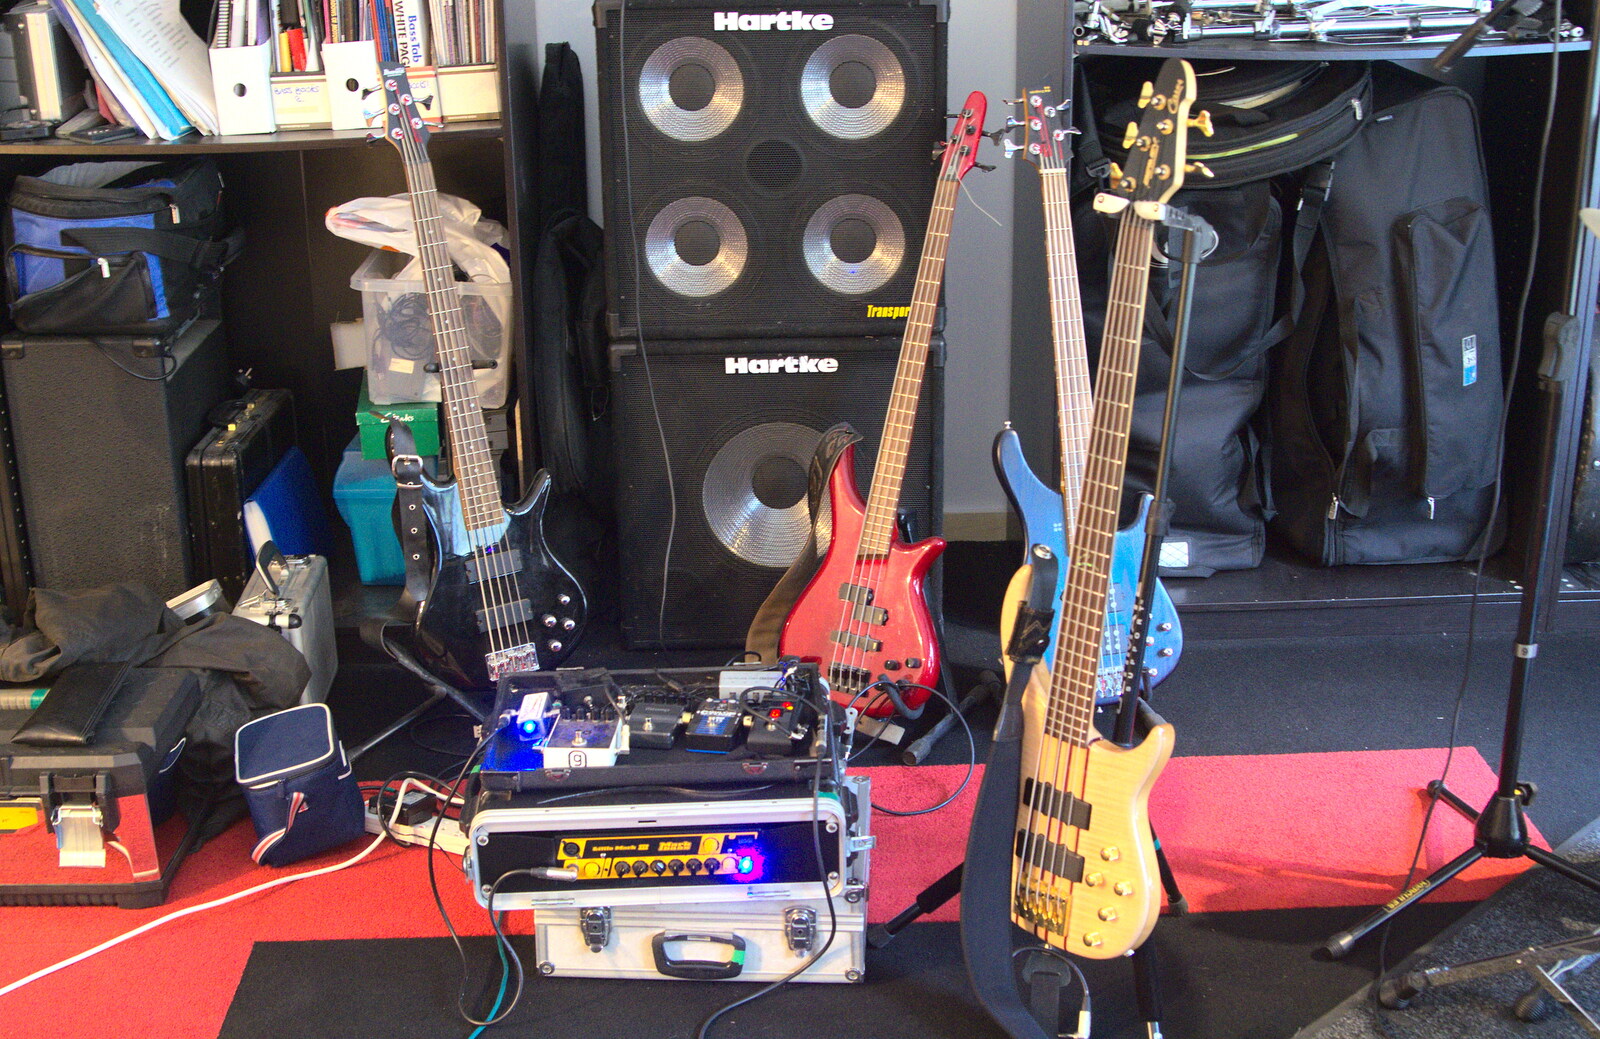 A collection of bass guitars like a music shop from The BBs do a Recording, Hethel, Norfolk - 18th January 2015